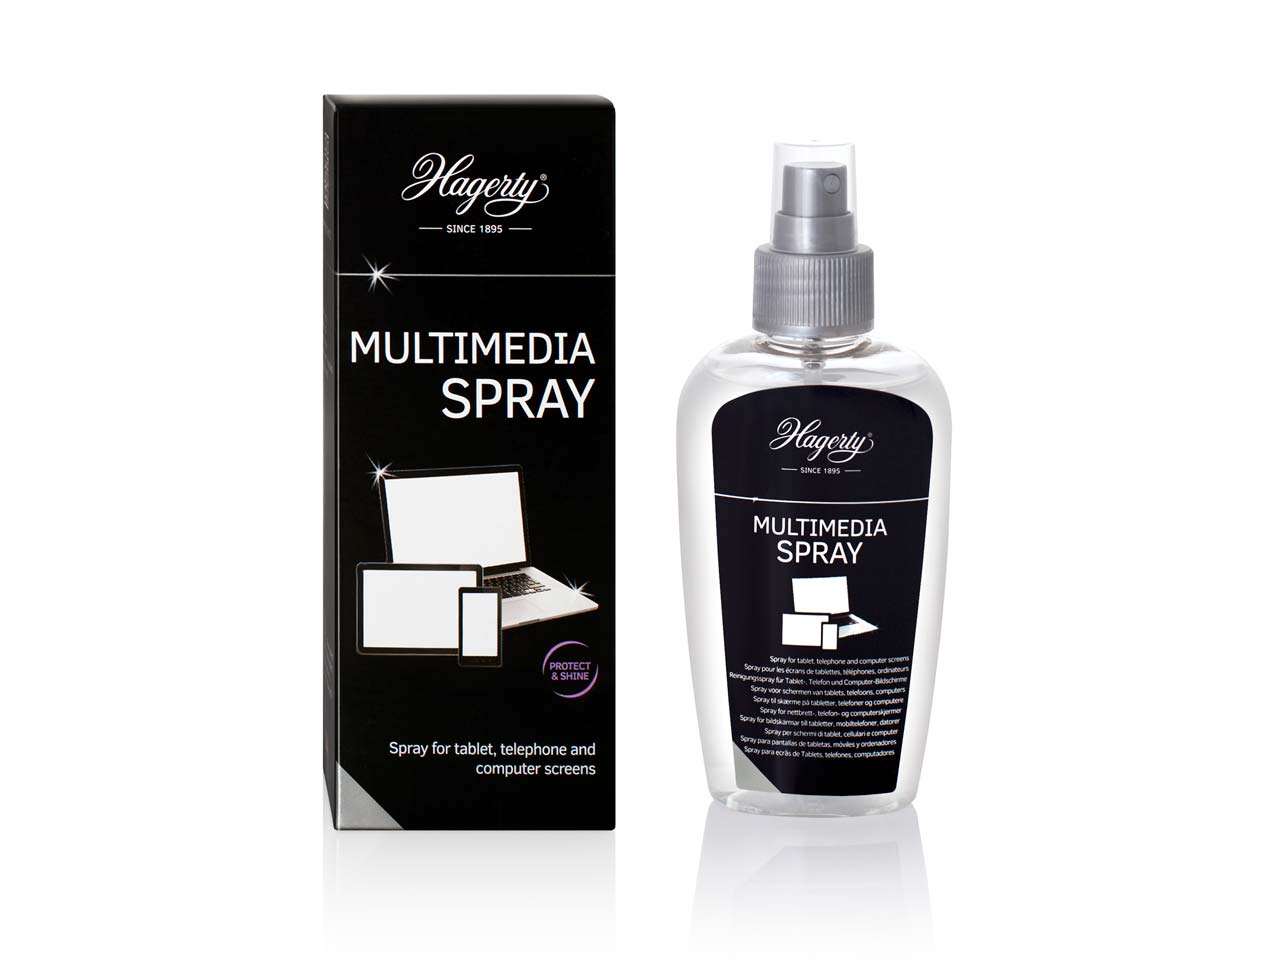 Hagerty Multimedia Spray 125ml Un1993 Questions & Answers